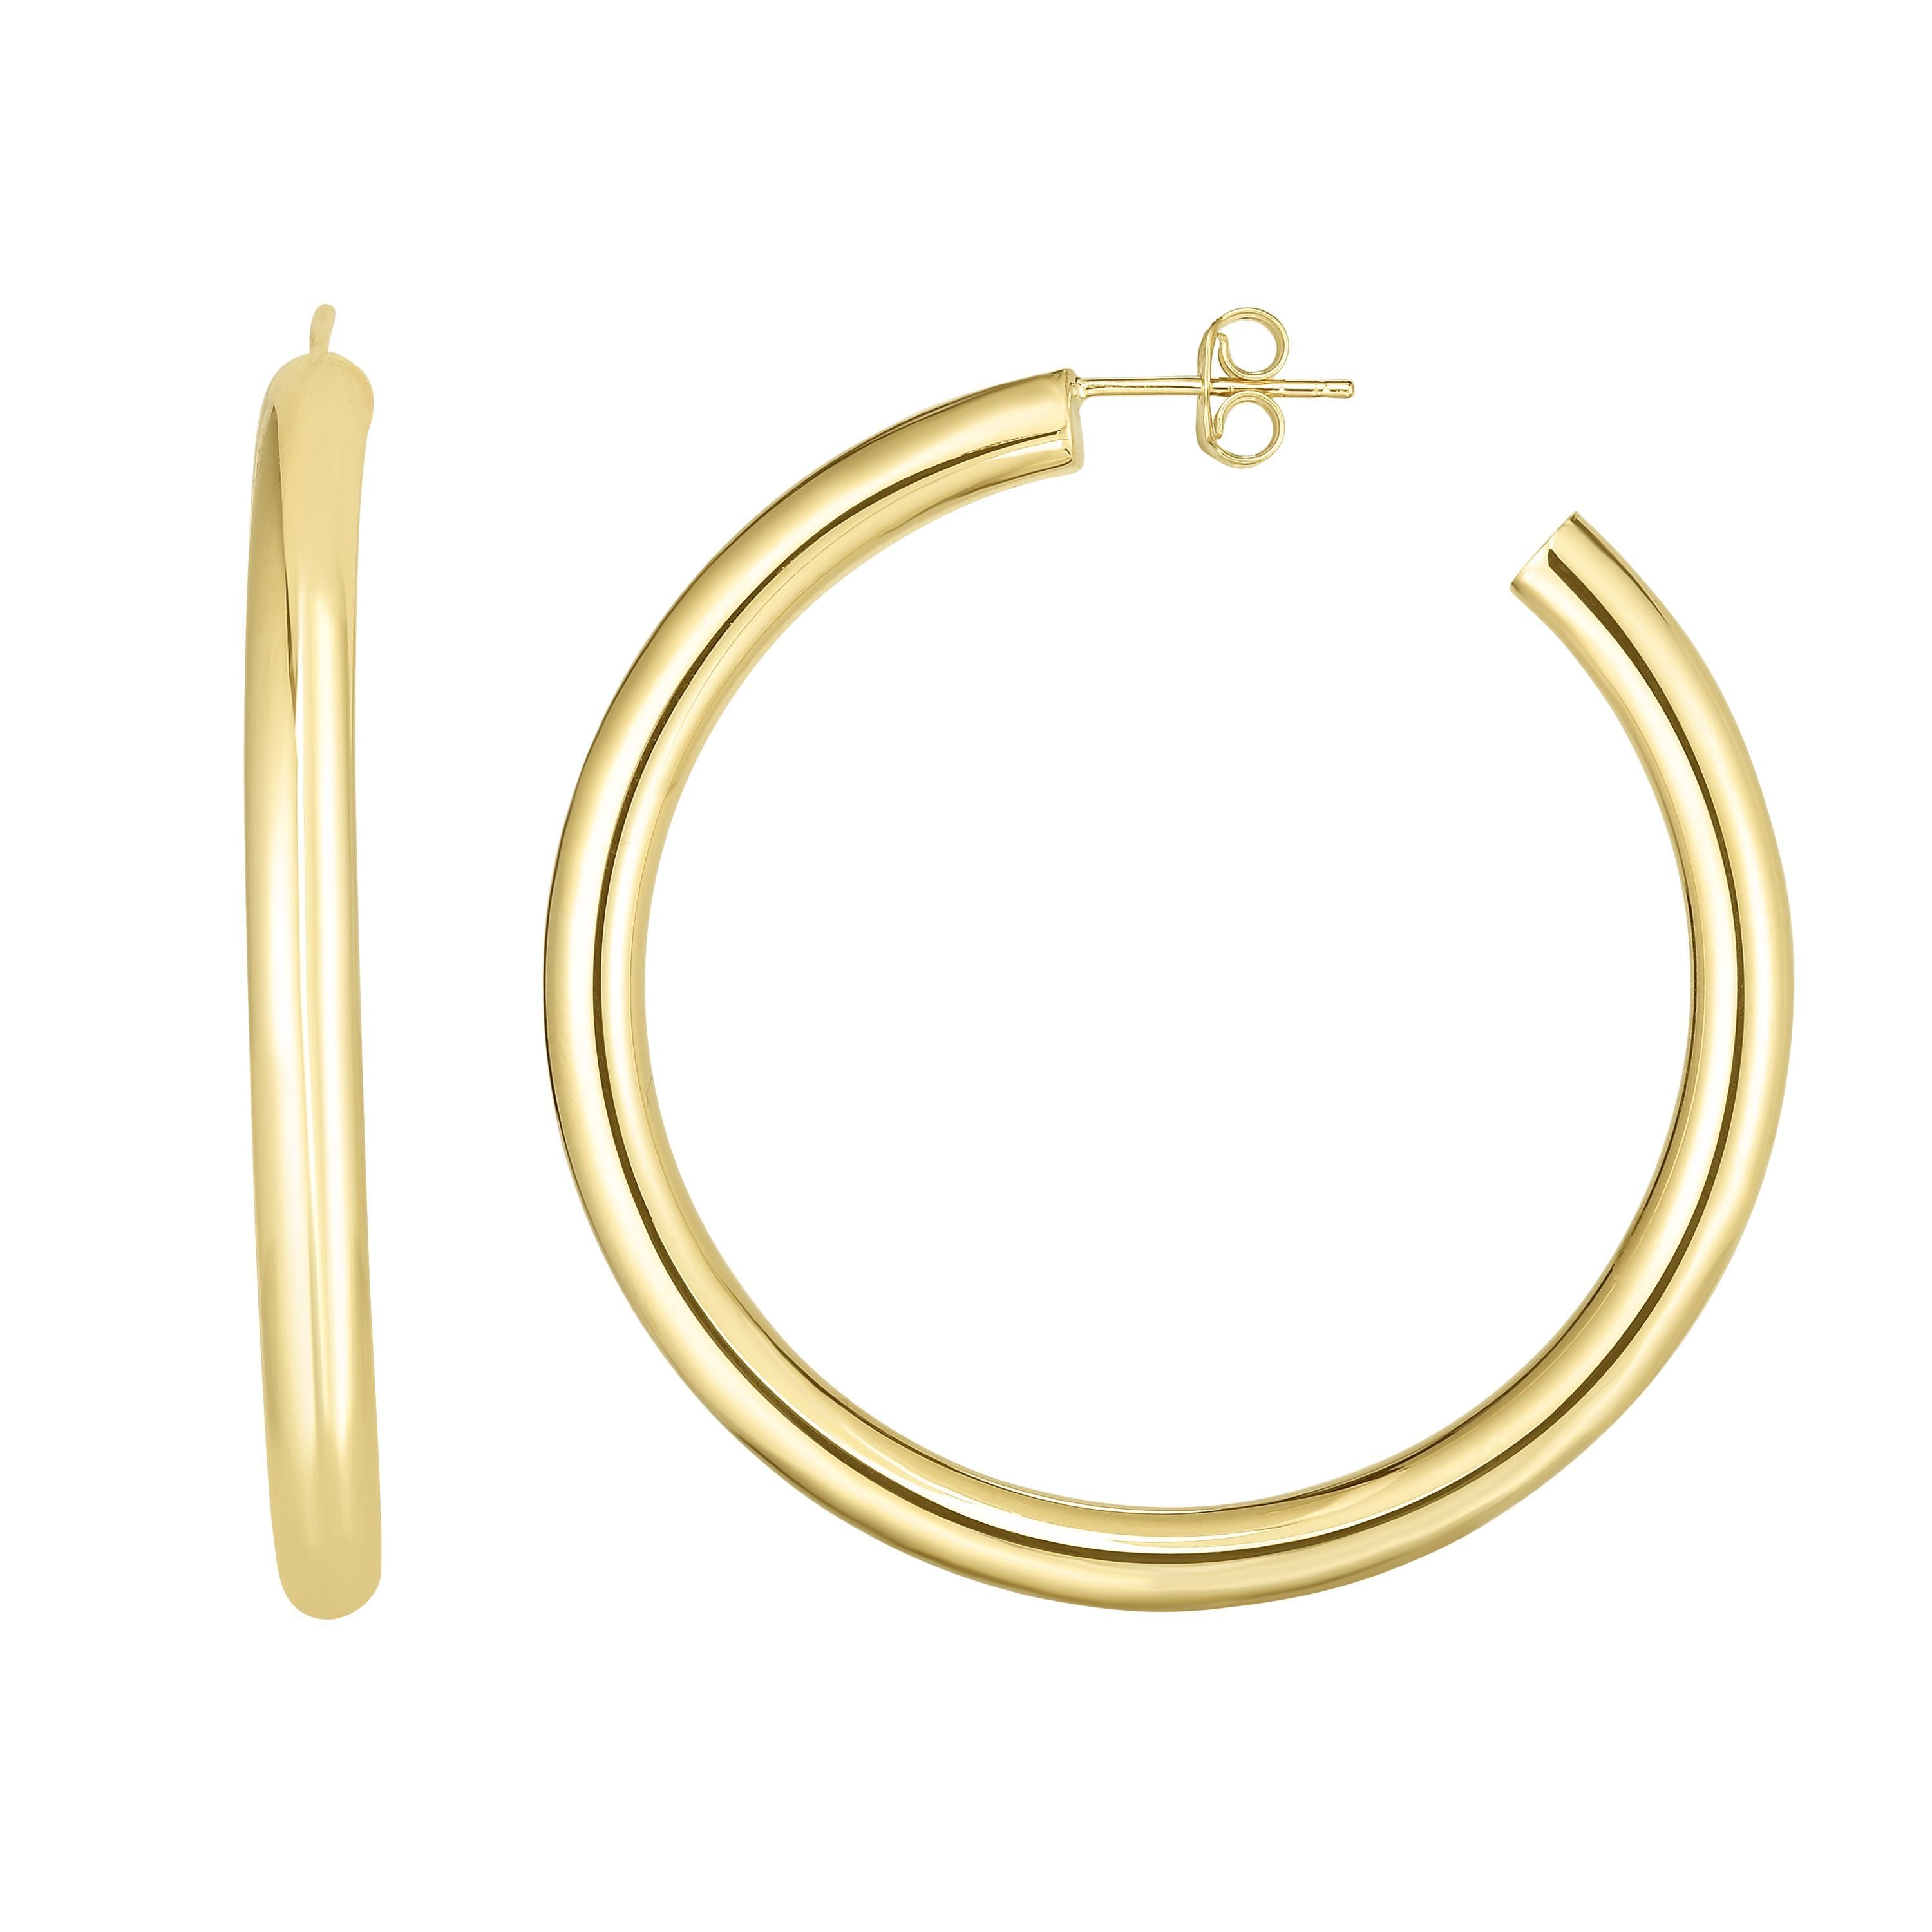 Minimalist Solid Gold Open Hoop Earrings, Post Earrings with Push Back Clasp made of 14k Solid Gold - wingroupjewelry